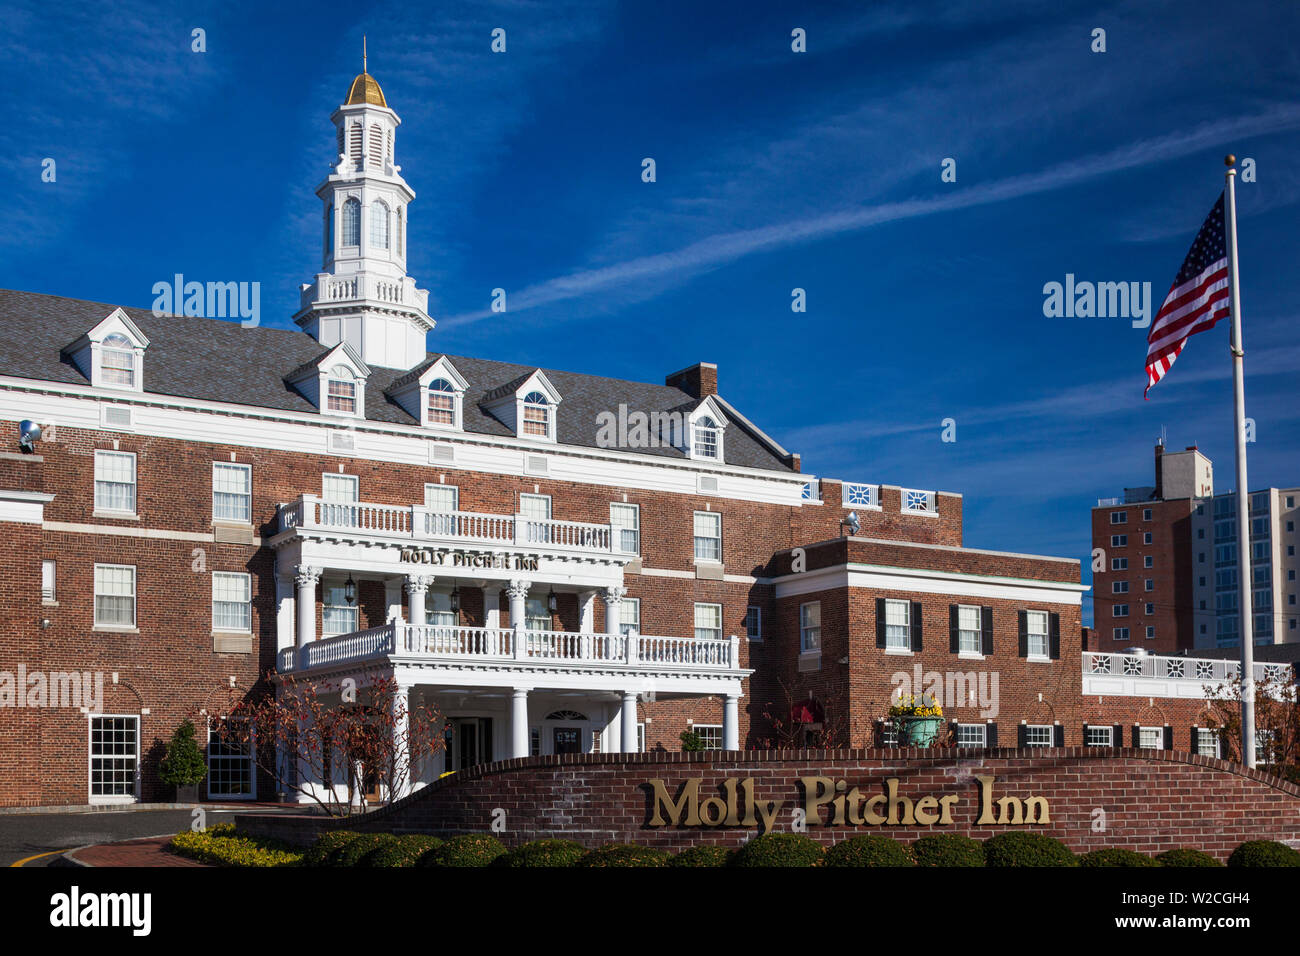 USA (New Jersey), Red Bank, Molly Pitcher Inn historique Banque D'Images